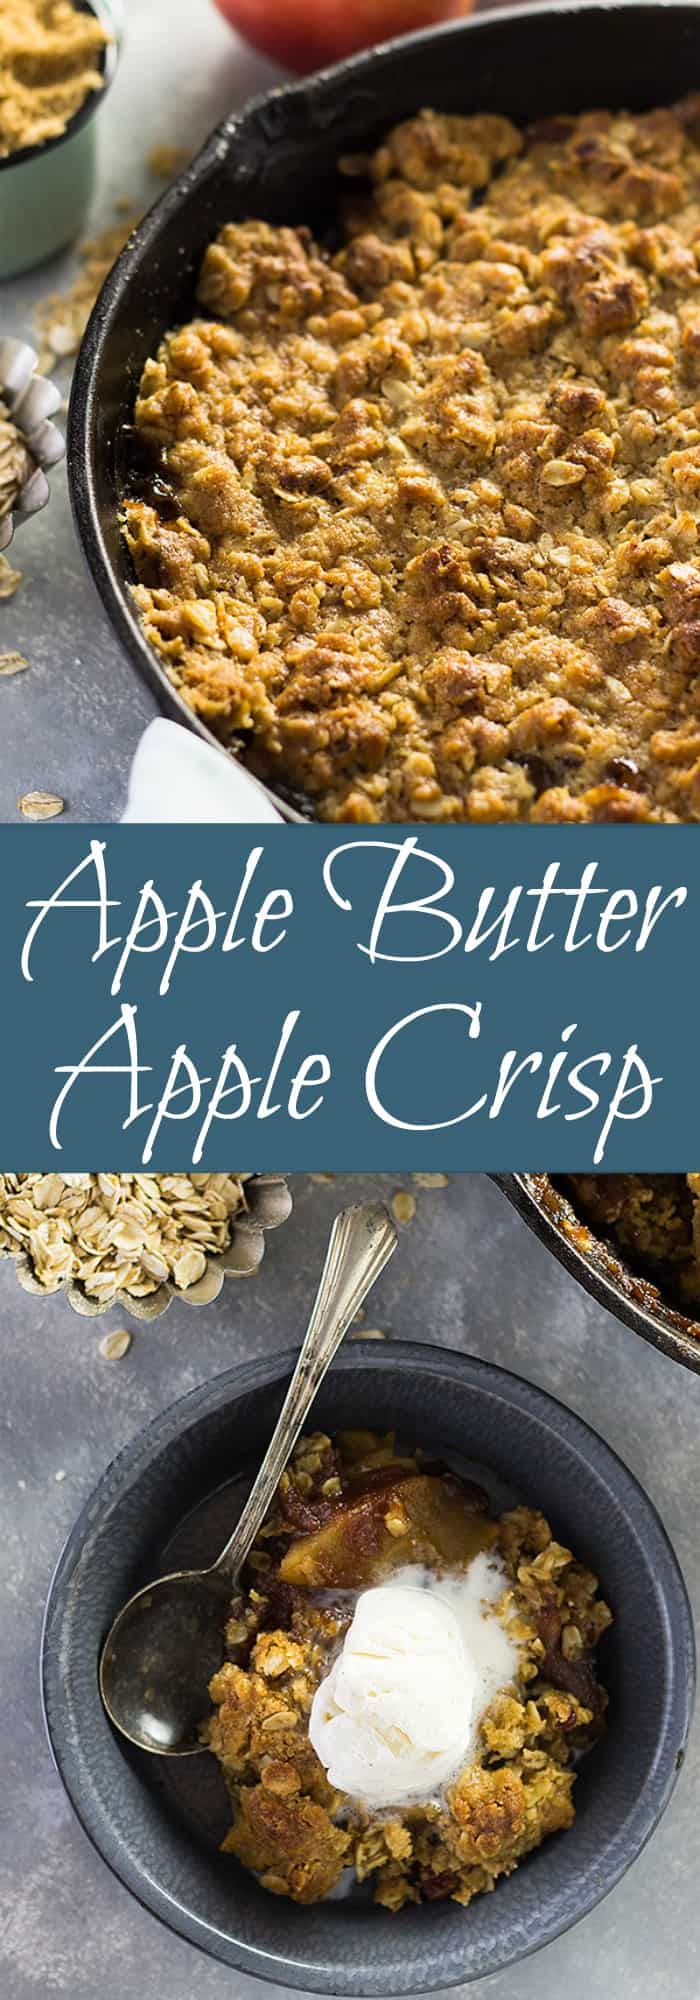 This Easy Apple Butter Apple Crisp is made with apple butter, sweet tender apples and a crunchy oat topping. | www.countrysidecravings.com